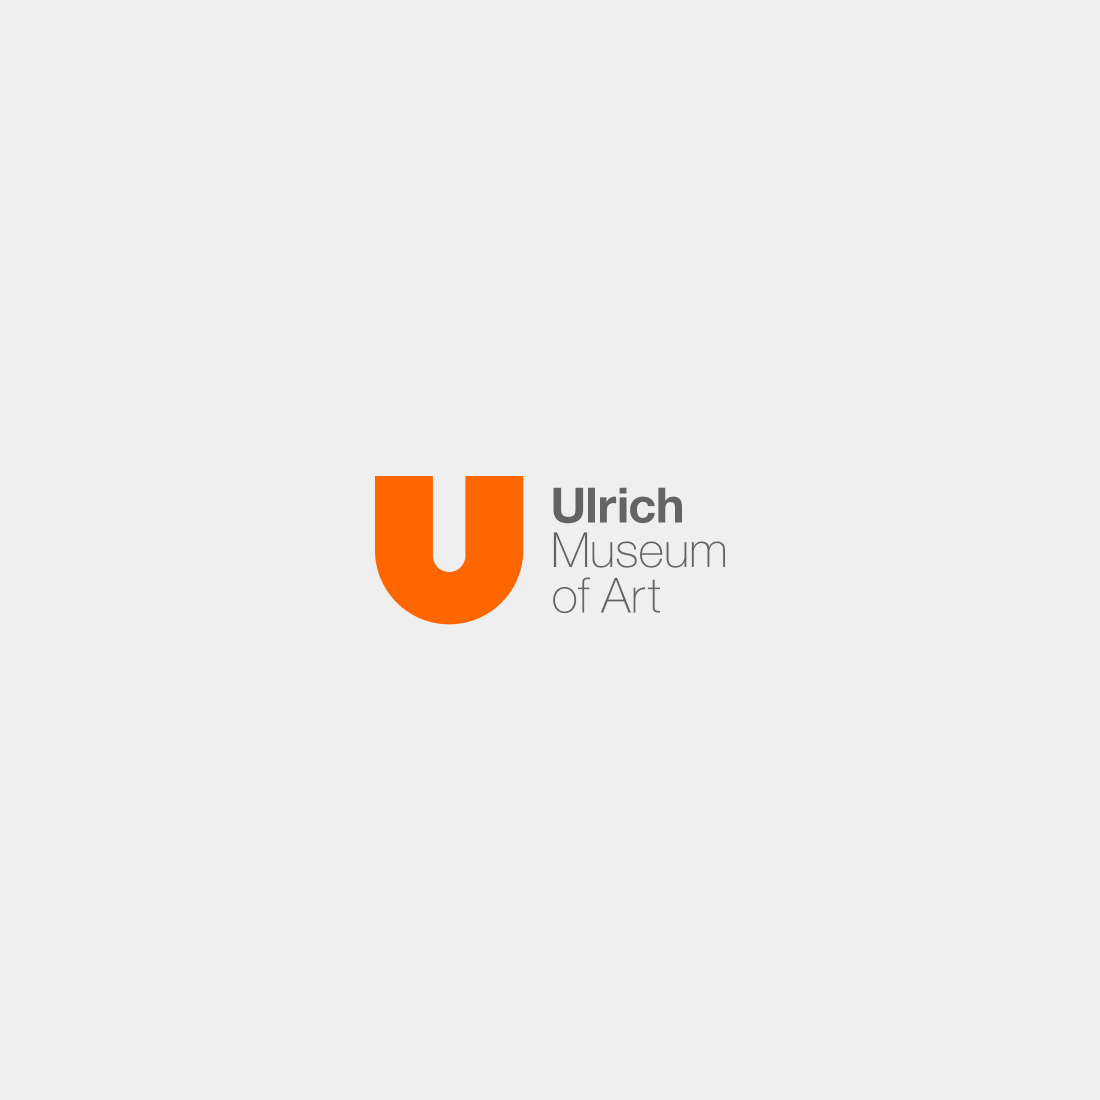 Logo for The Edwin A. Ulrich Museum of Art, a modern and contemporary art museum at Wichita State University